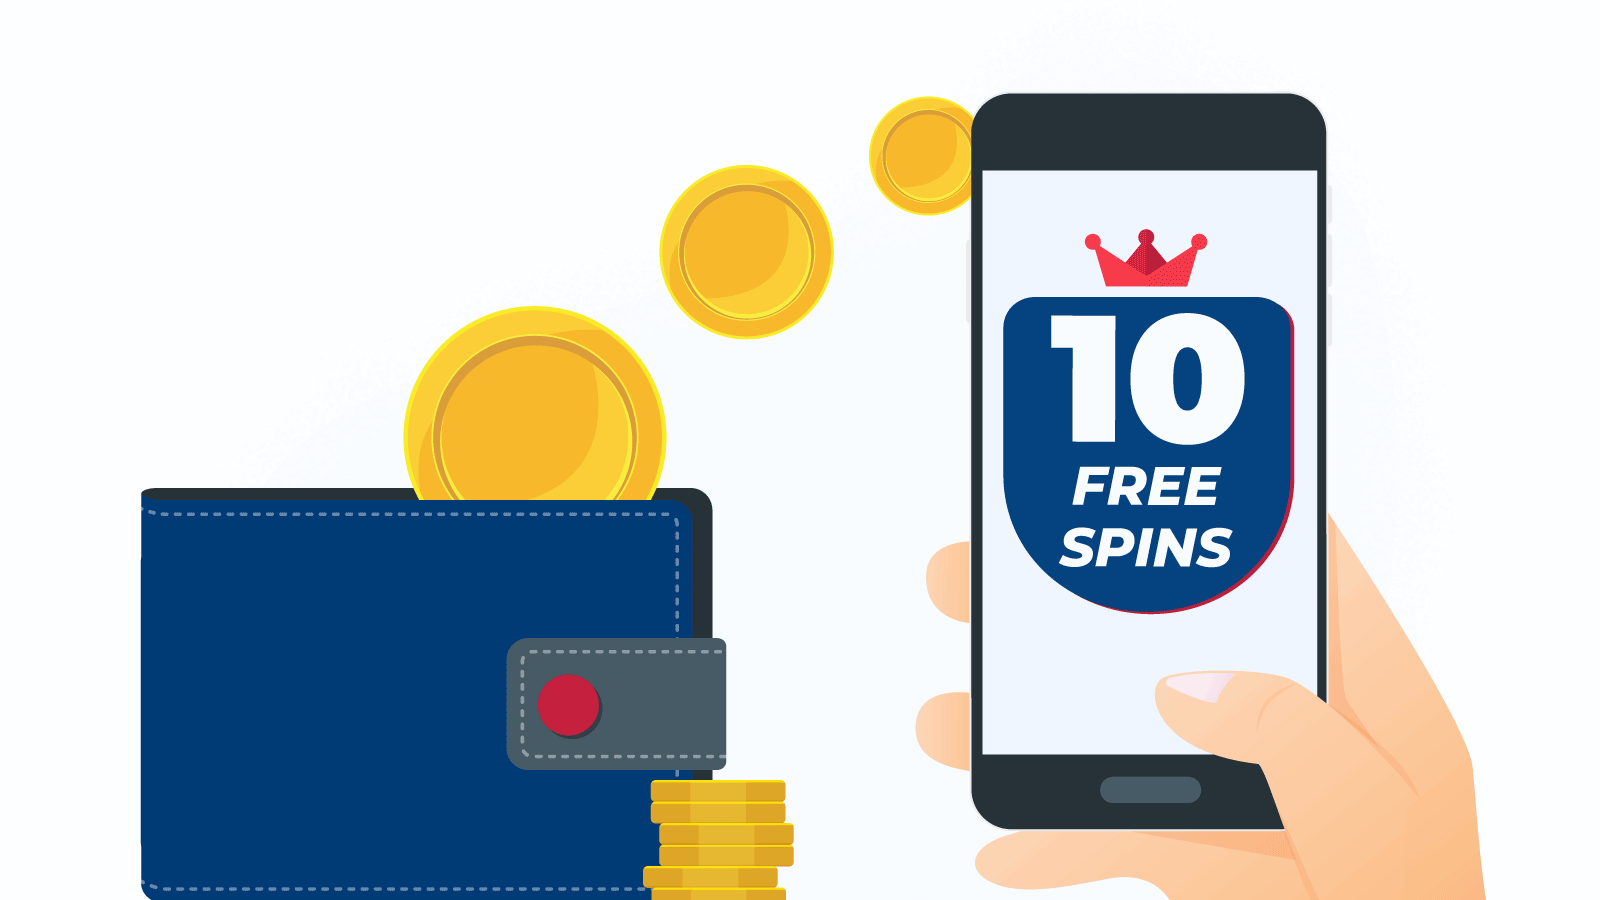 Withdraw Safely Your 10 Free Spins 2022 Winnings